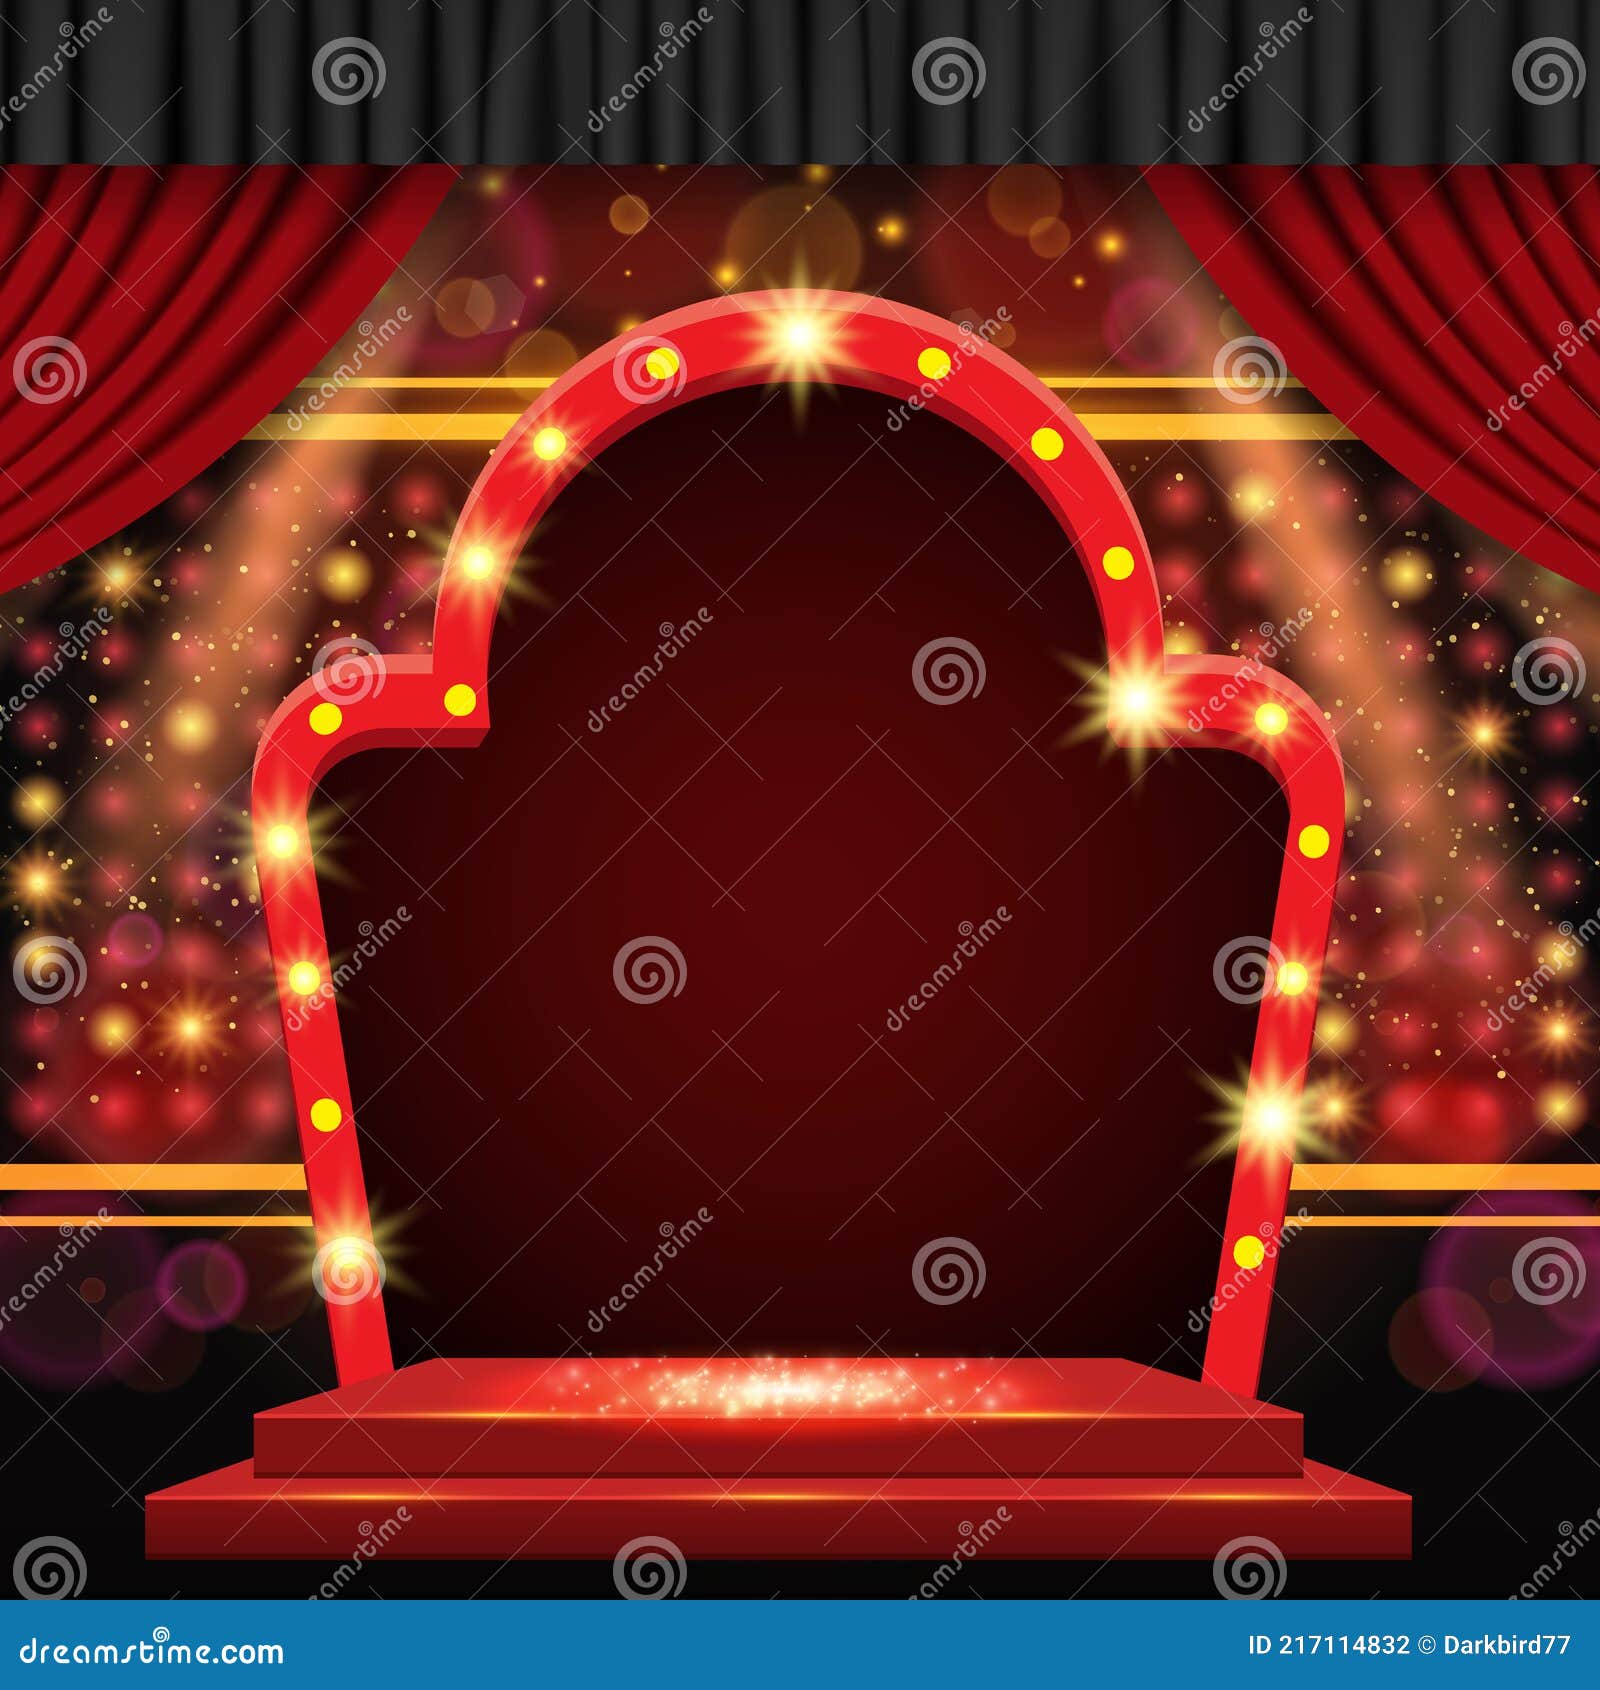 Background with Red Curtain and Arch Banner. Design for Presentation,  Concert, Show Stock Vector - Illustration of elegance, night: 217114832